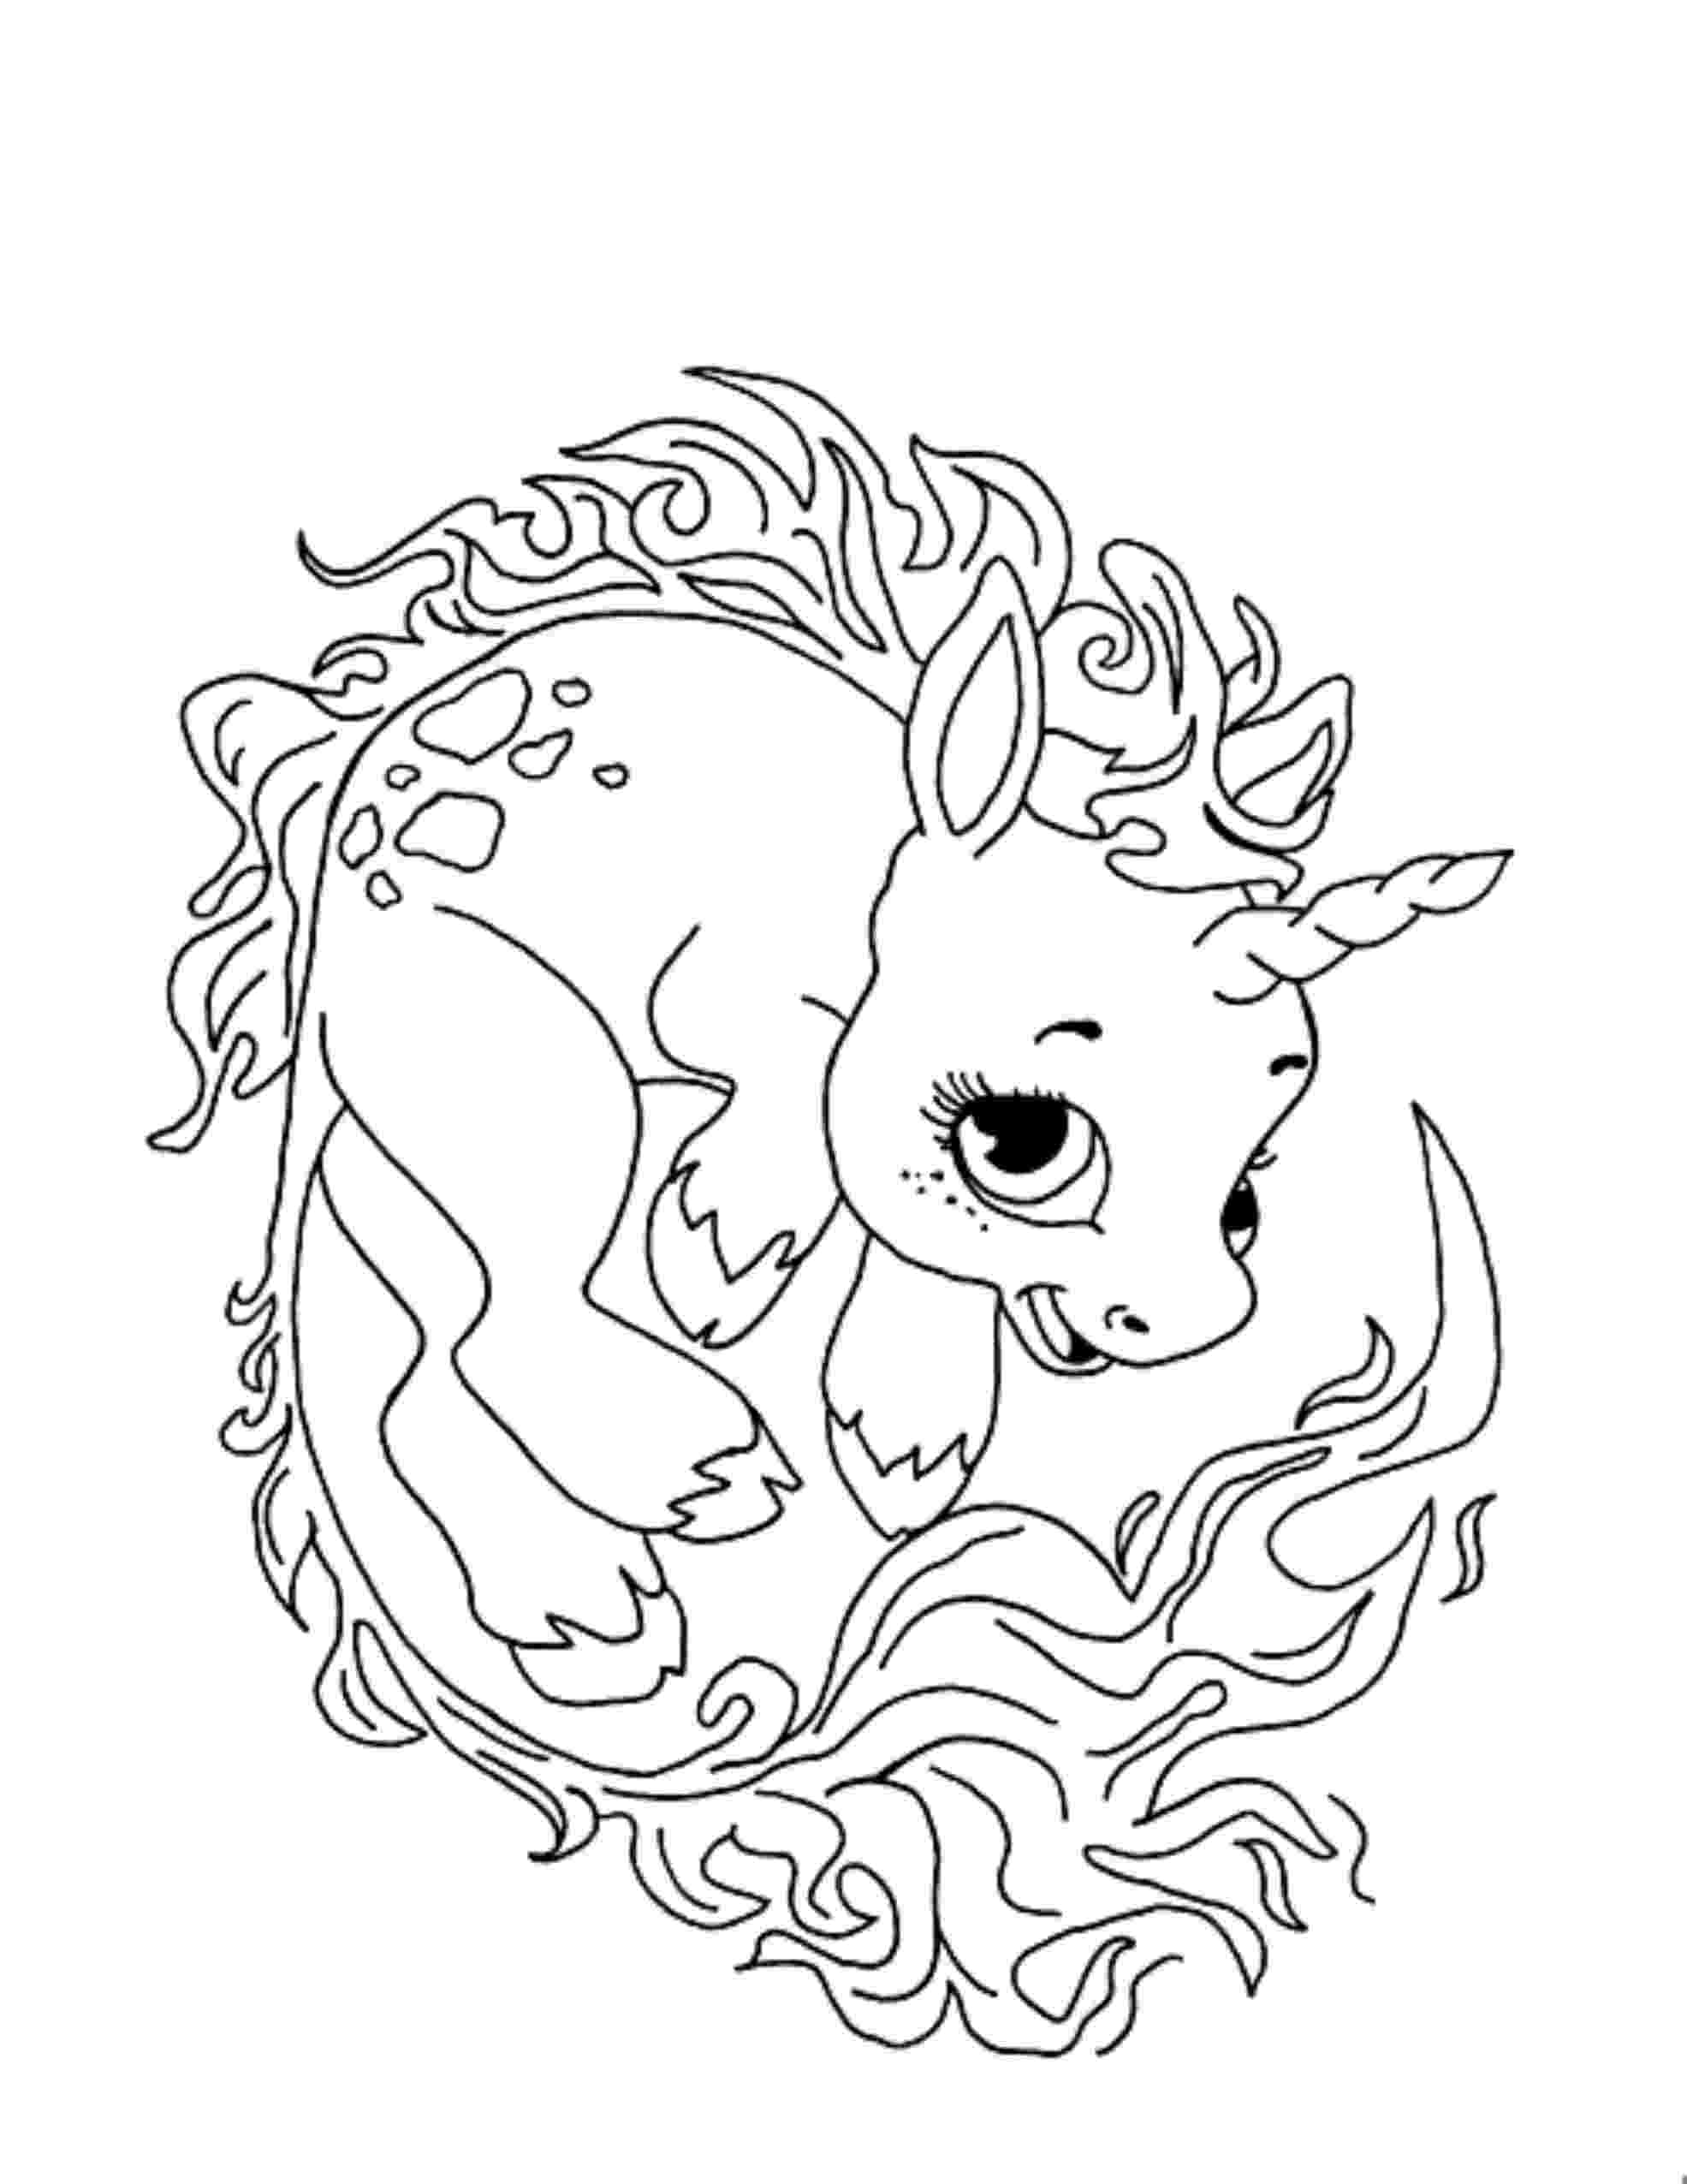 free unicorn pictures to color unicorn coloring pages to download and print for free unicorn to color free pictures 